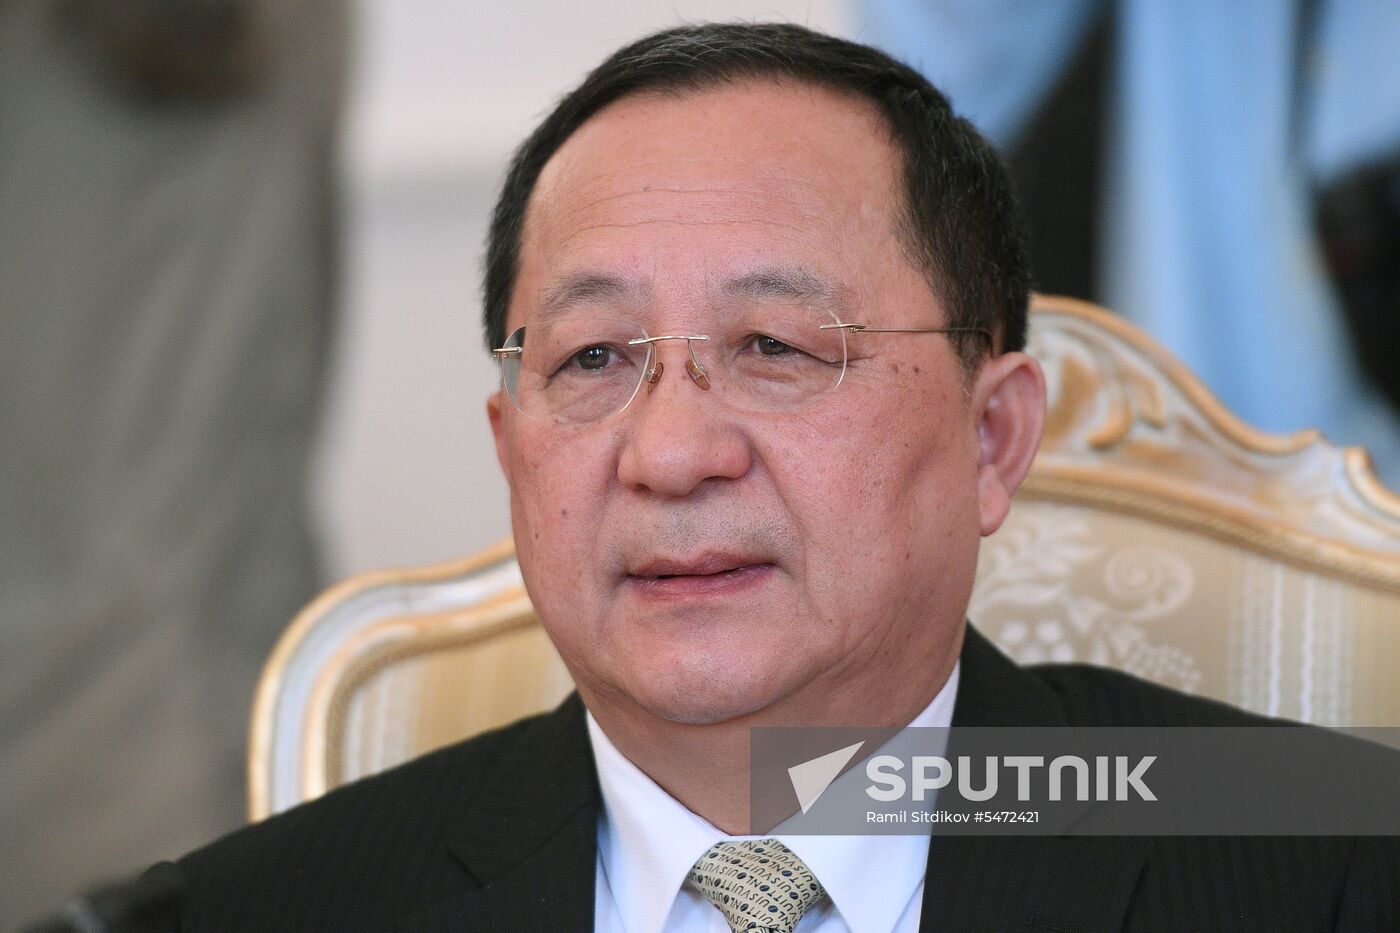 Russian Foreign Minister Lavrov meets with North Korean counterpart, Ri Yong-ho